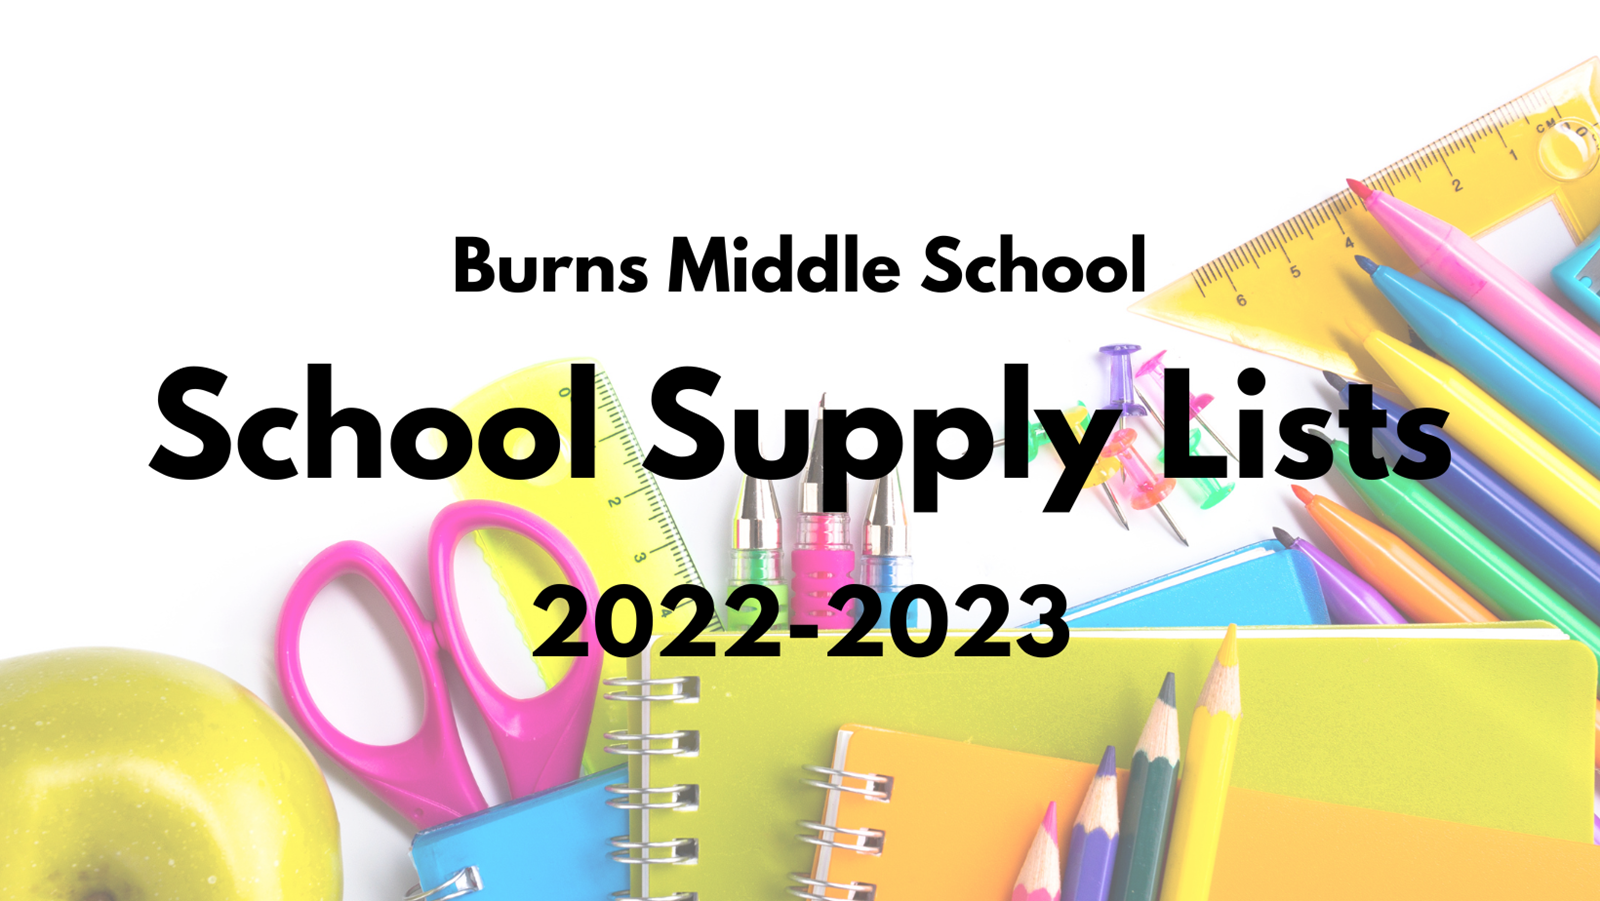 Random school supplies on a white background with the text Burns Middle School School Supply Lists 2022-2023 overlayed in black font